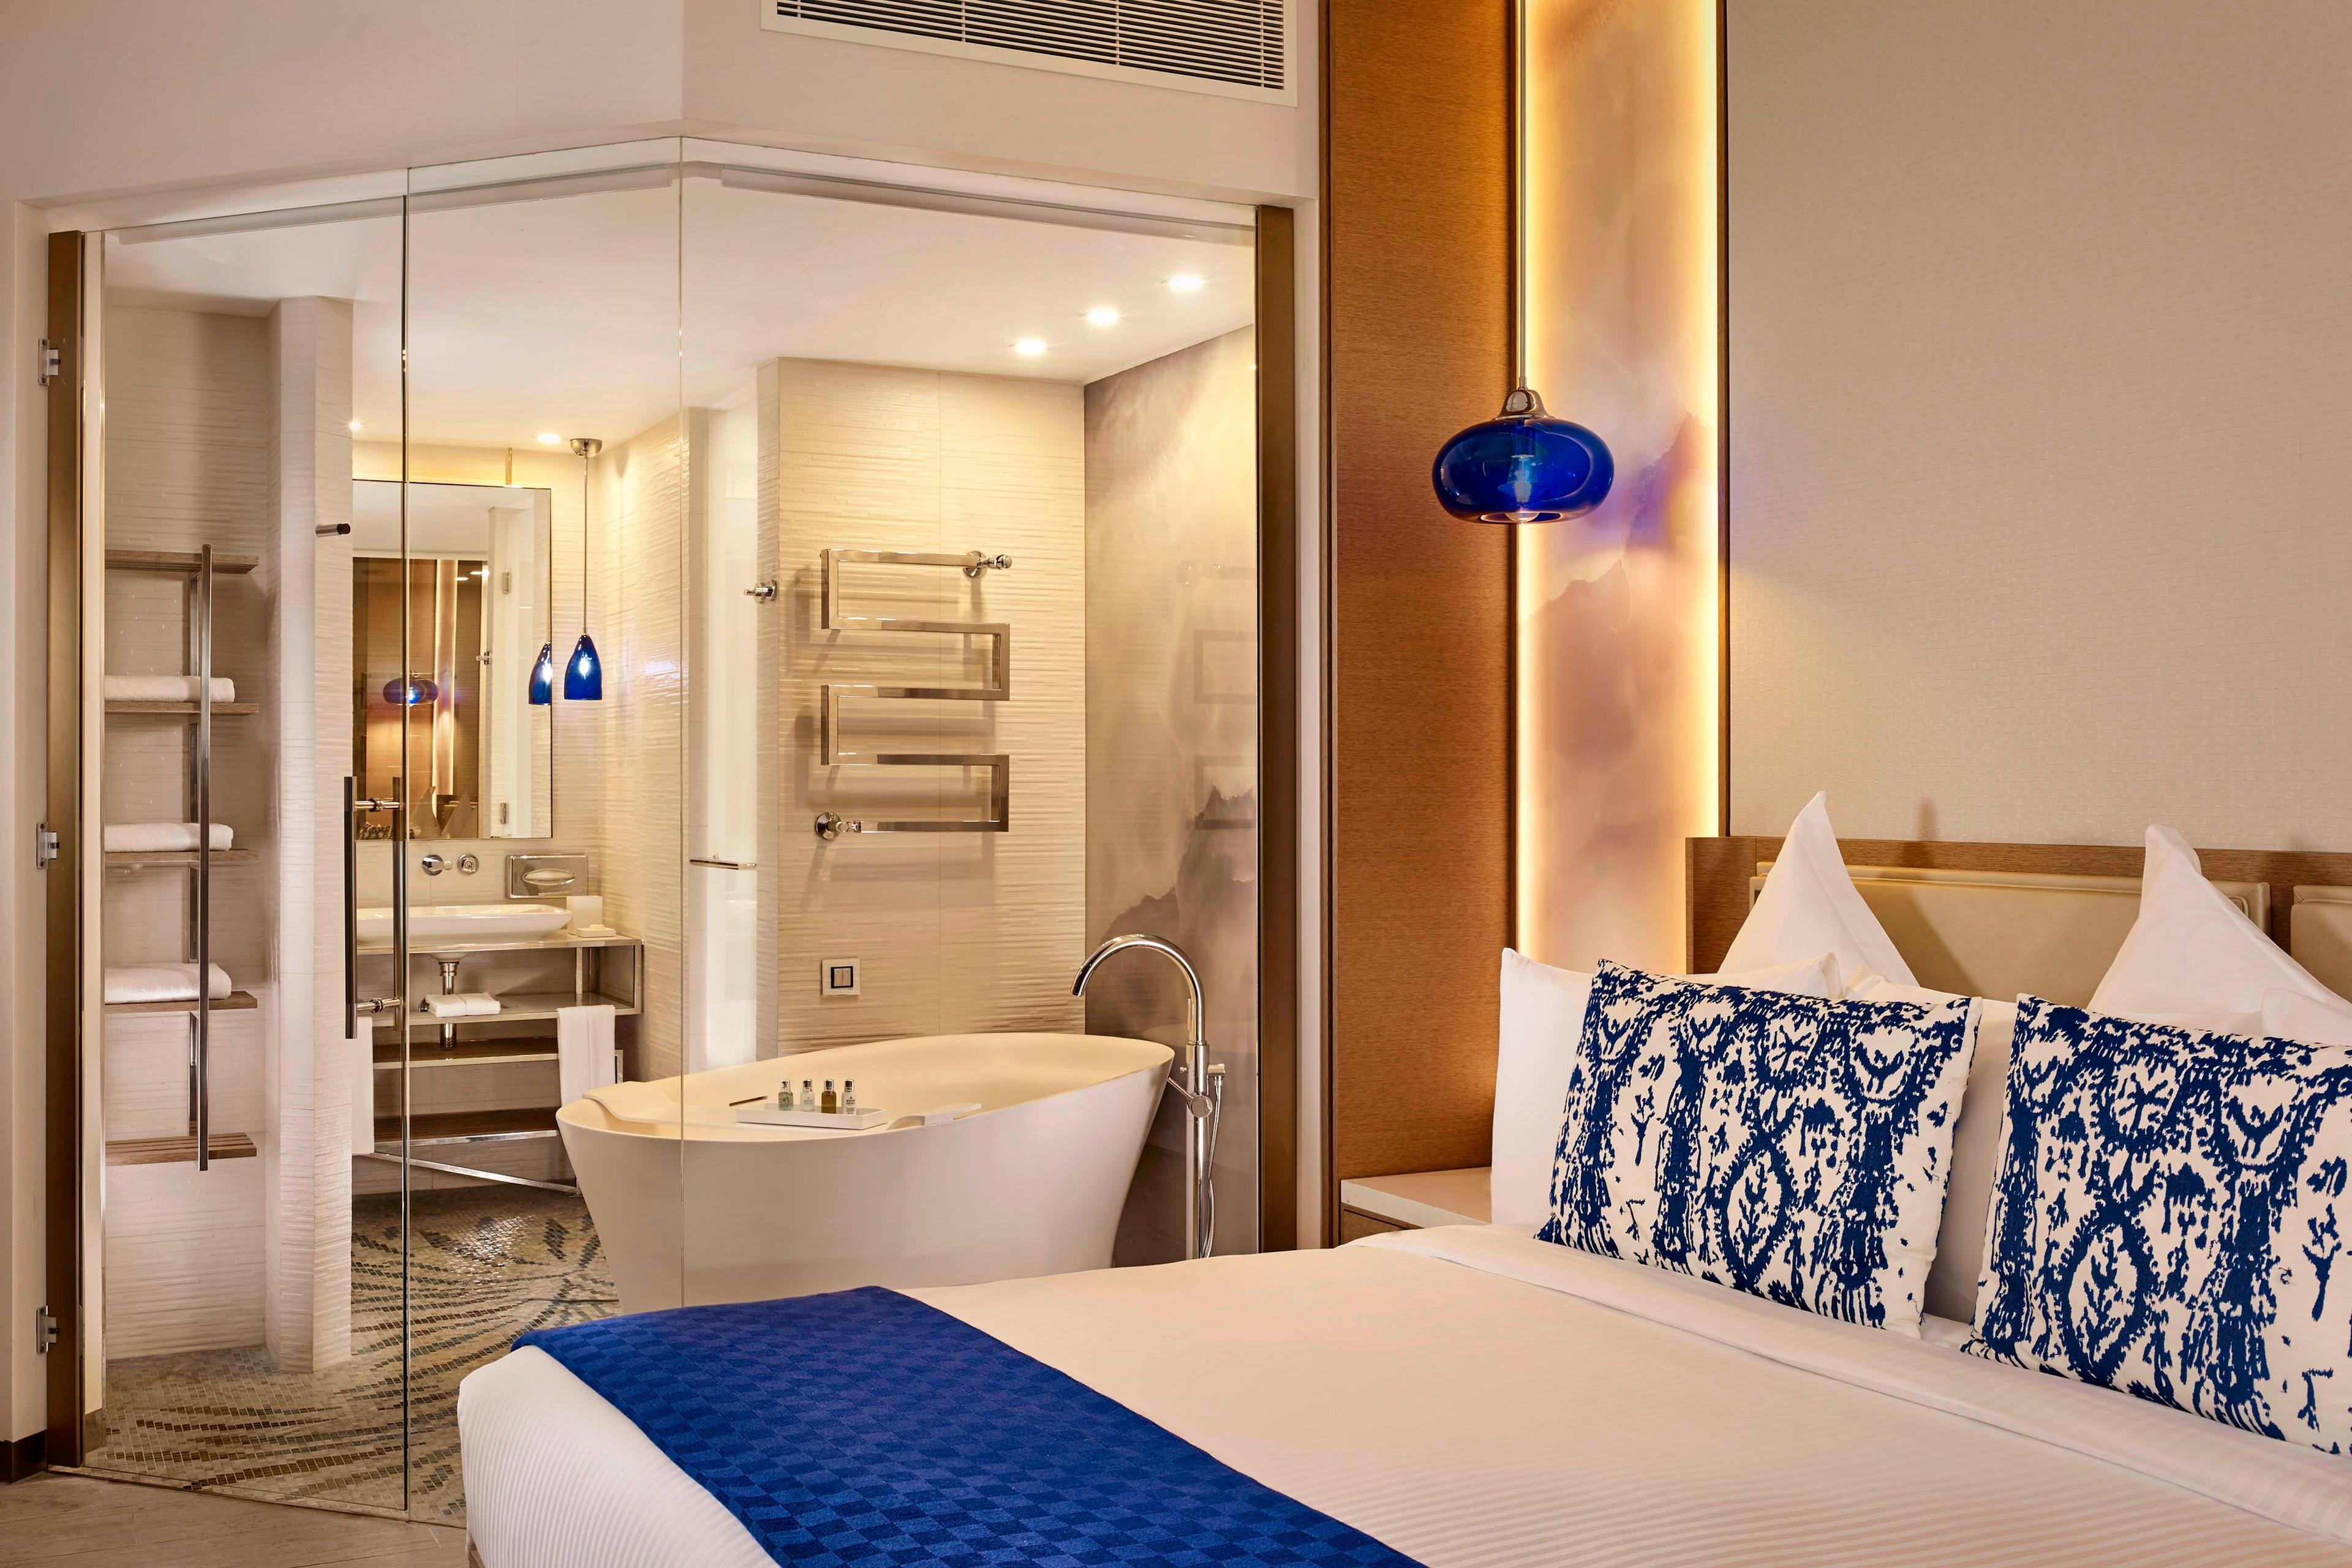 Stunning architecture and thoughtful design allow you to enjoy every aspect of your suite. The Deluxe King room includes a glass-walled bathroom with rainfall shower and mosaic detailing.